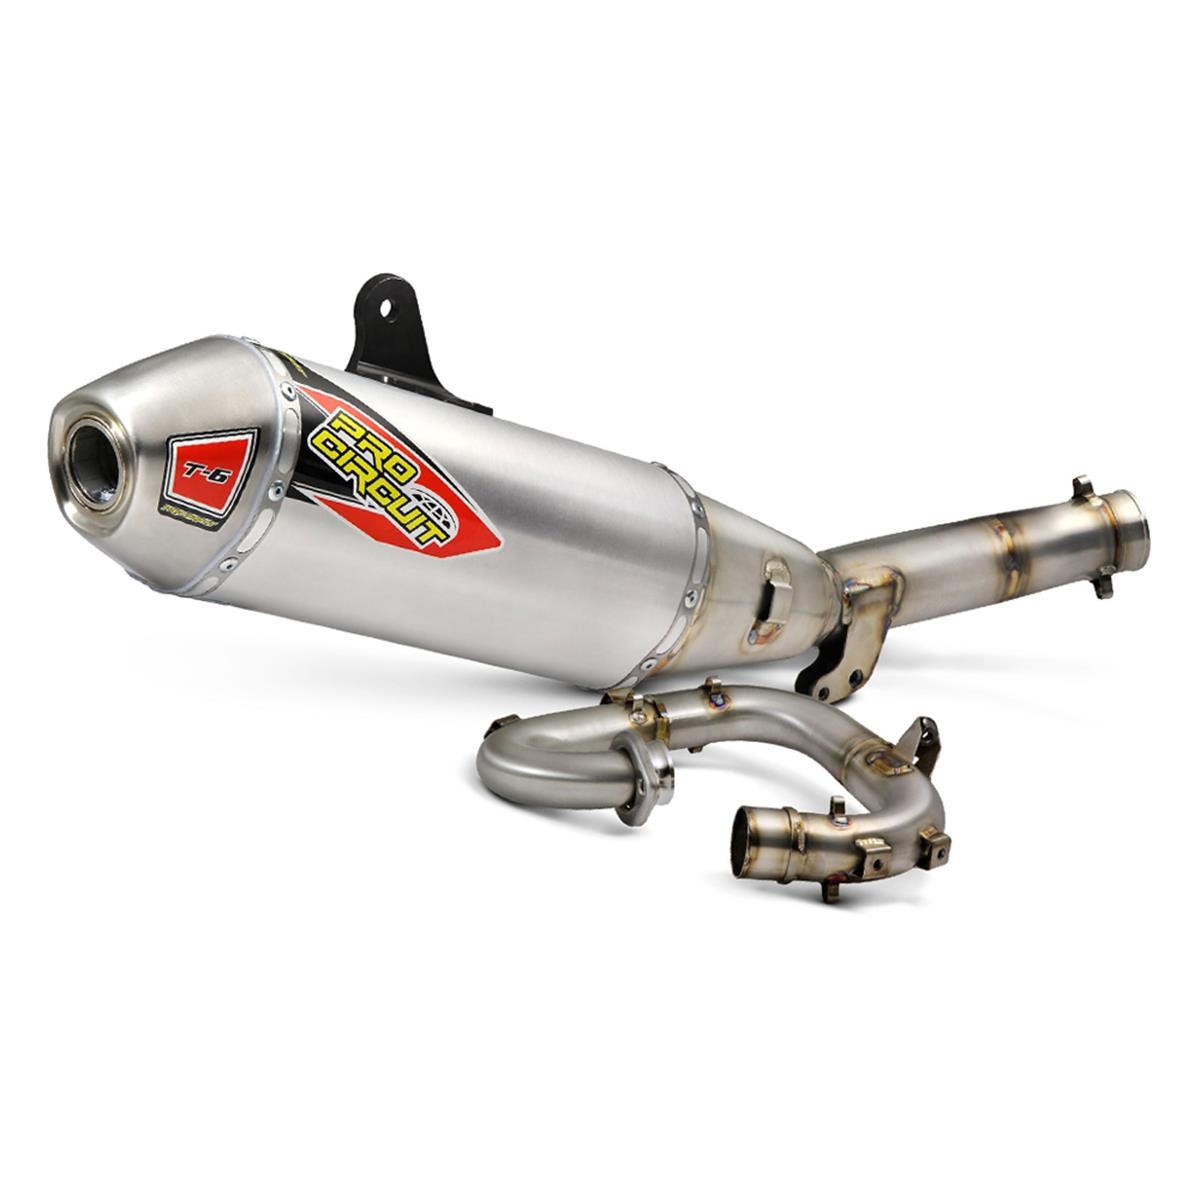 Pro Circuit Ligne complète T-6 Yamaha YZF 450 14-16, Stainless Steel/Aluminium/Stainless Steel